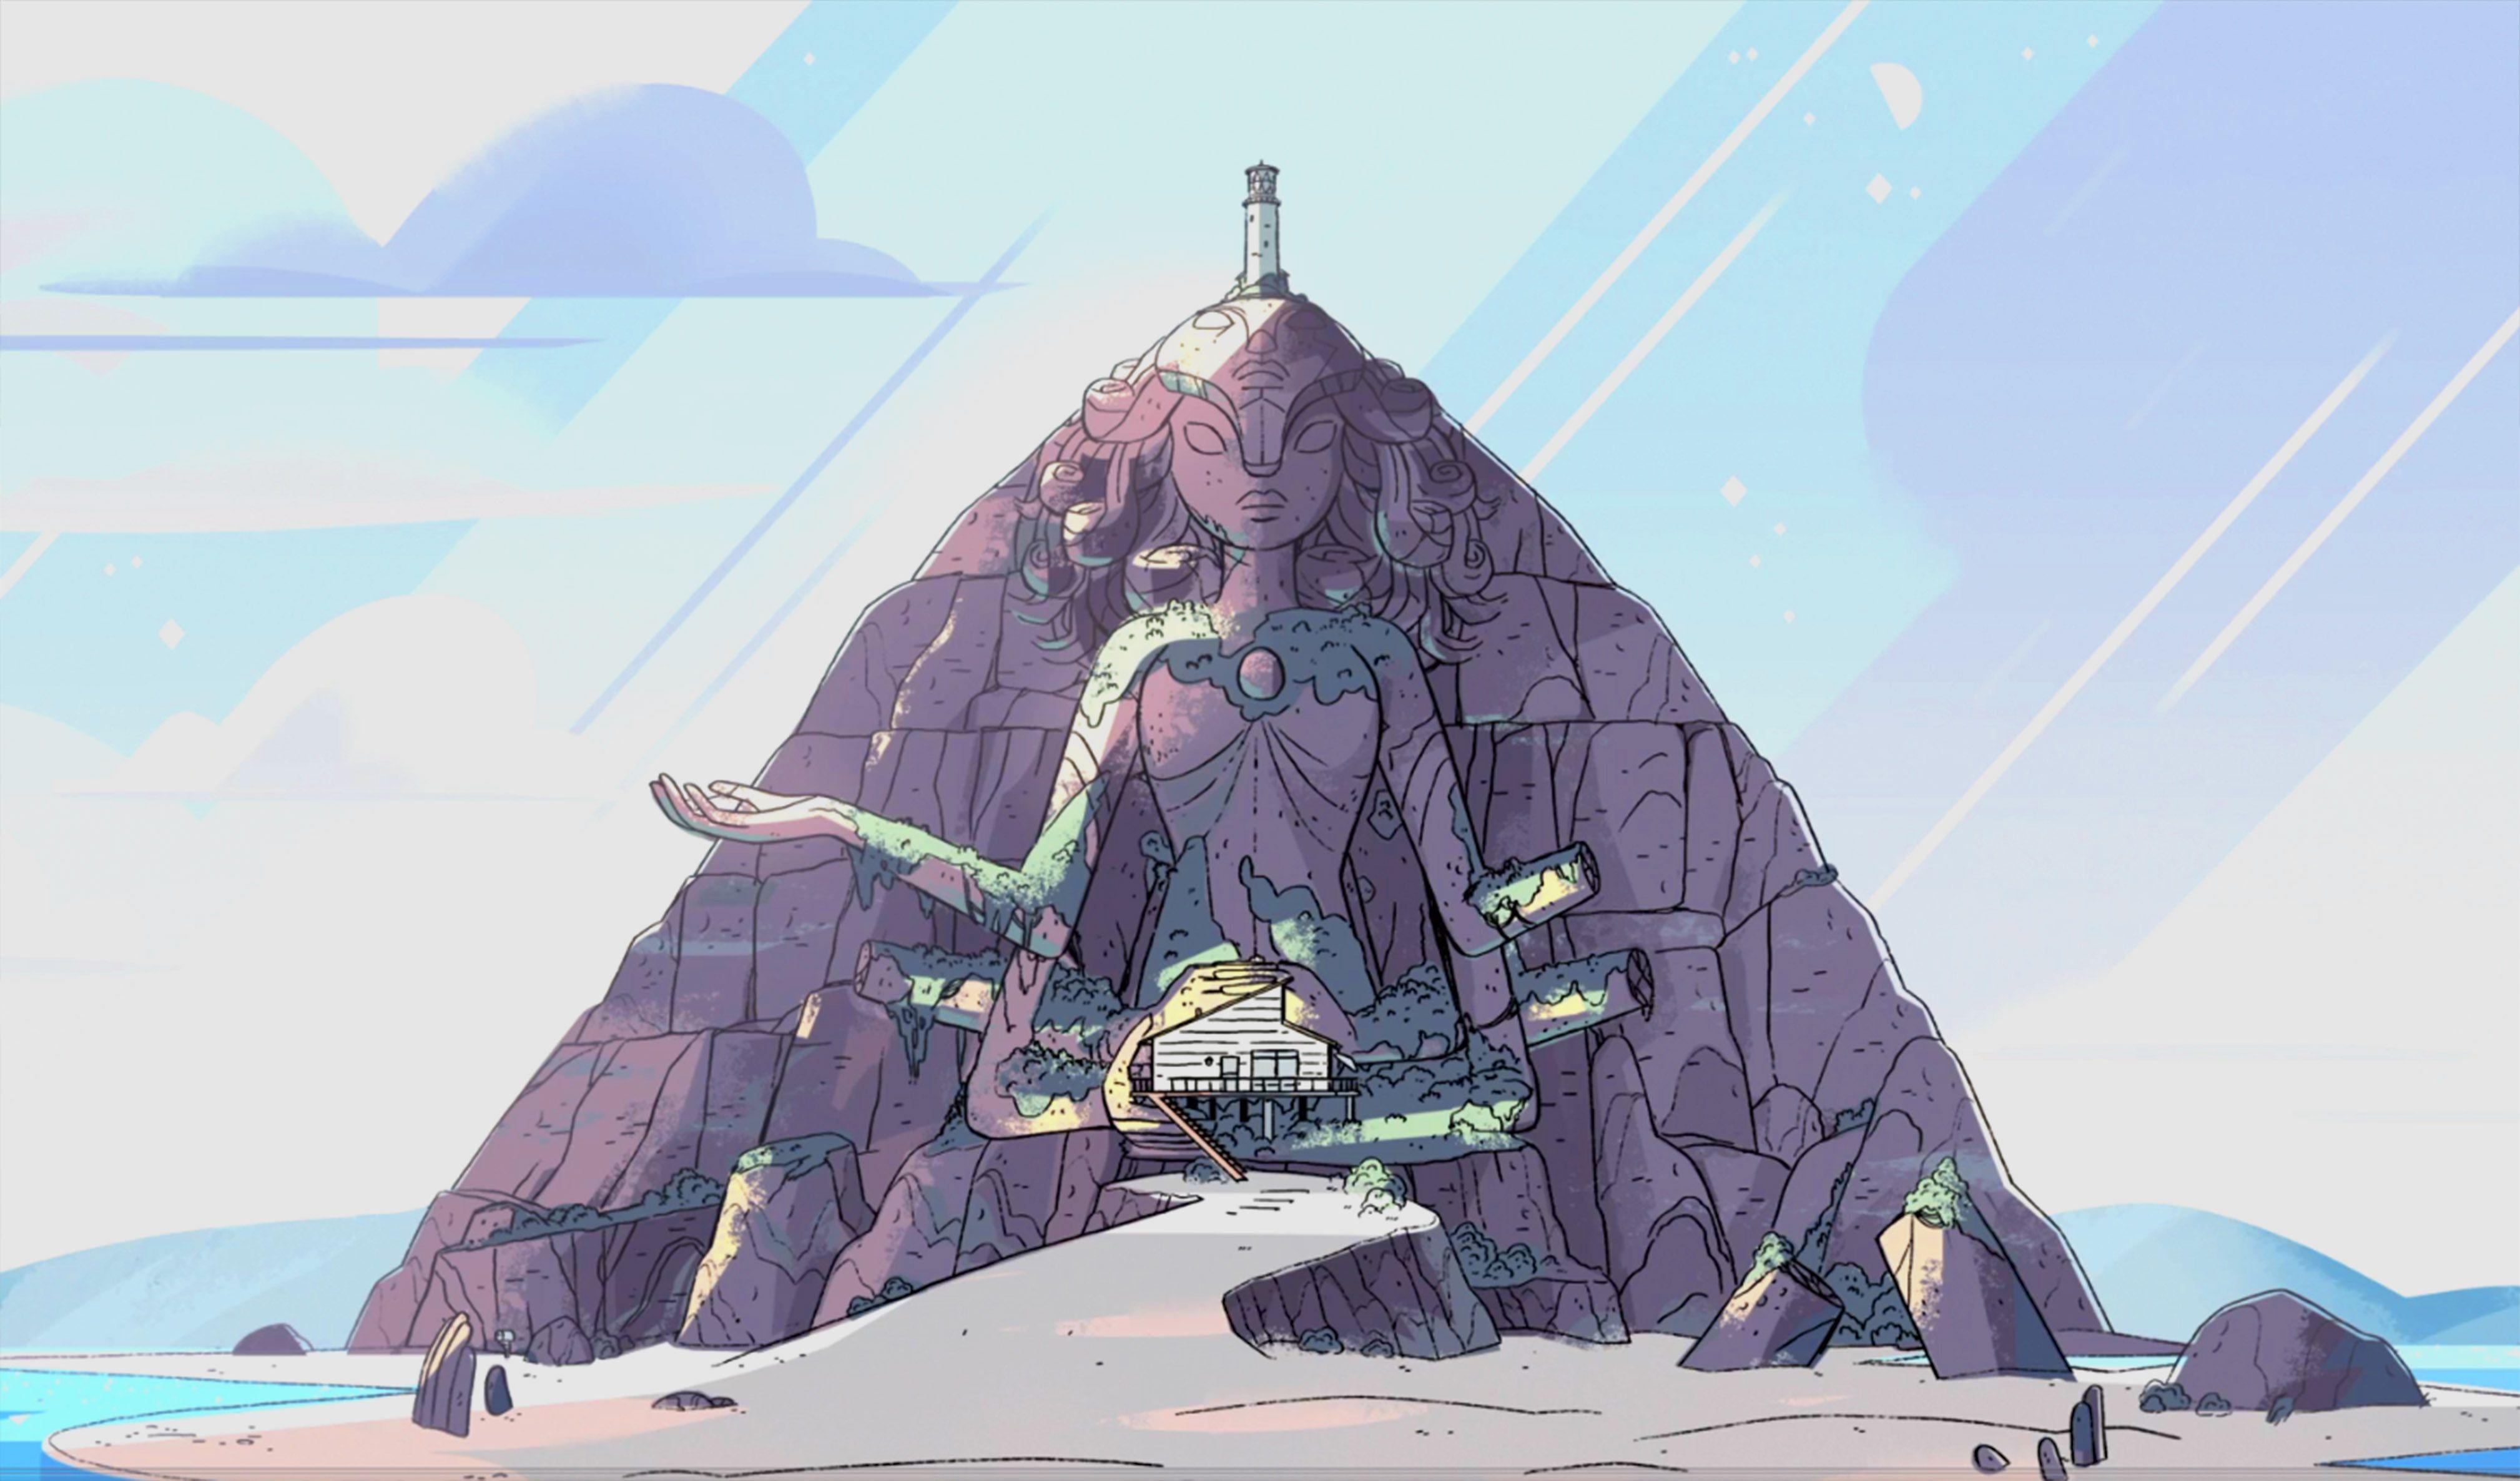 backgrounds for any steven universe fans out there. hopefully